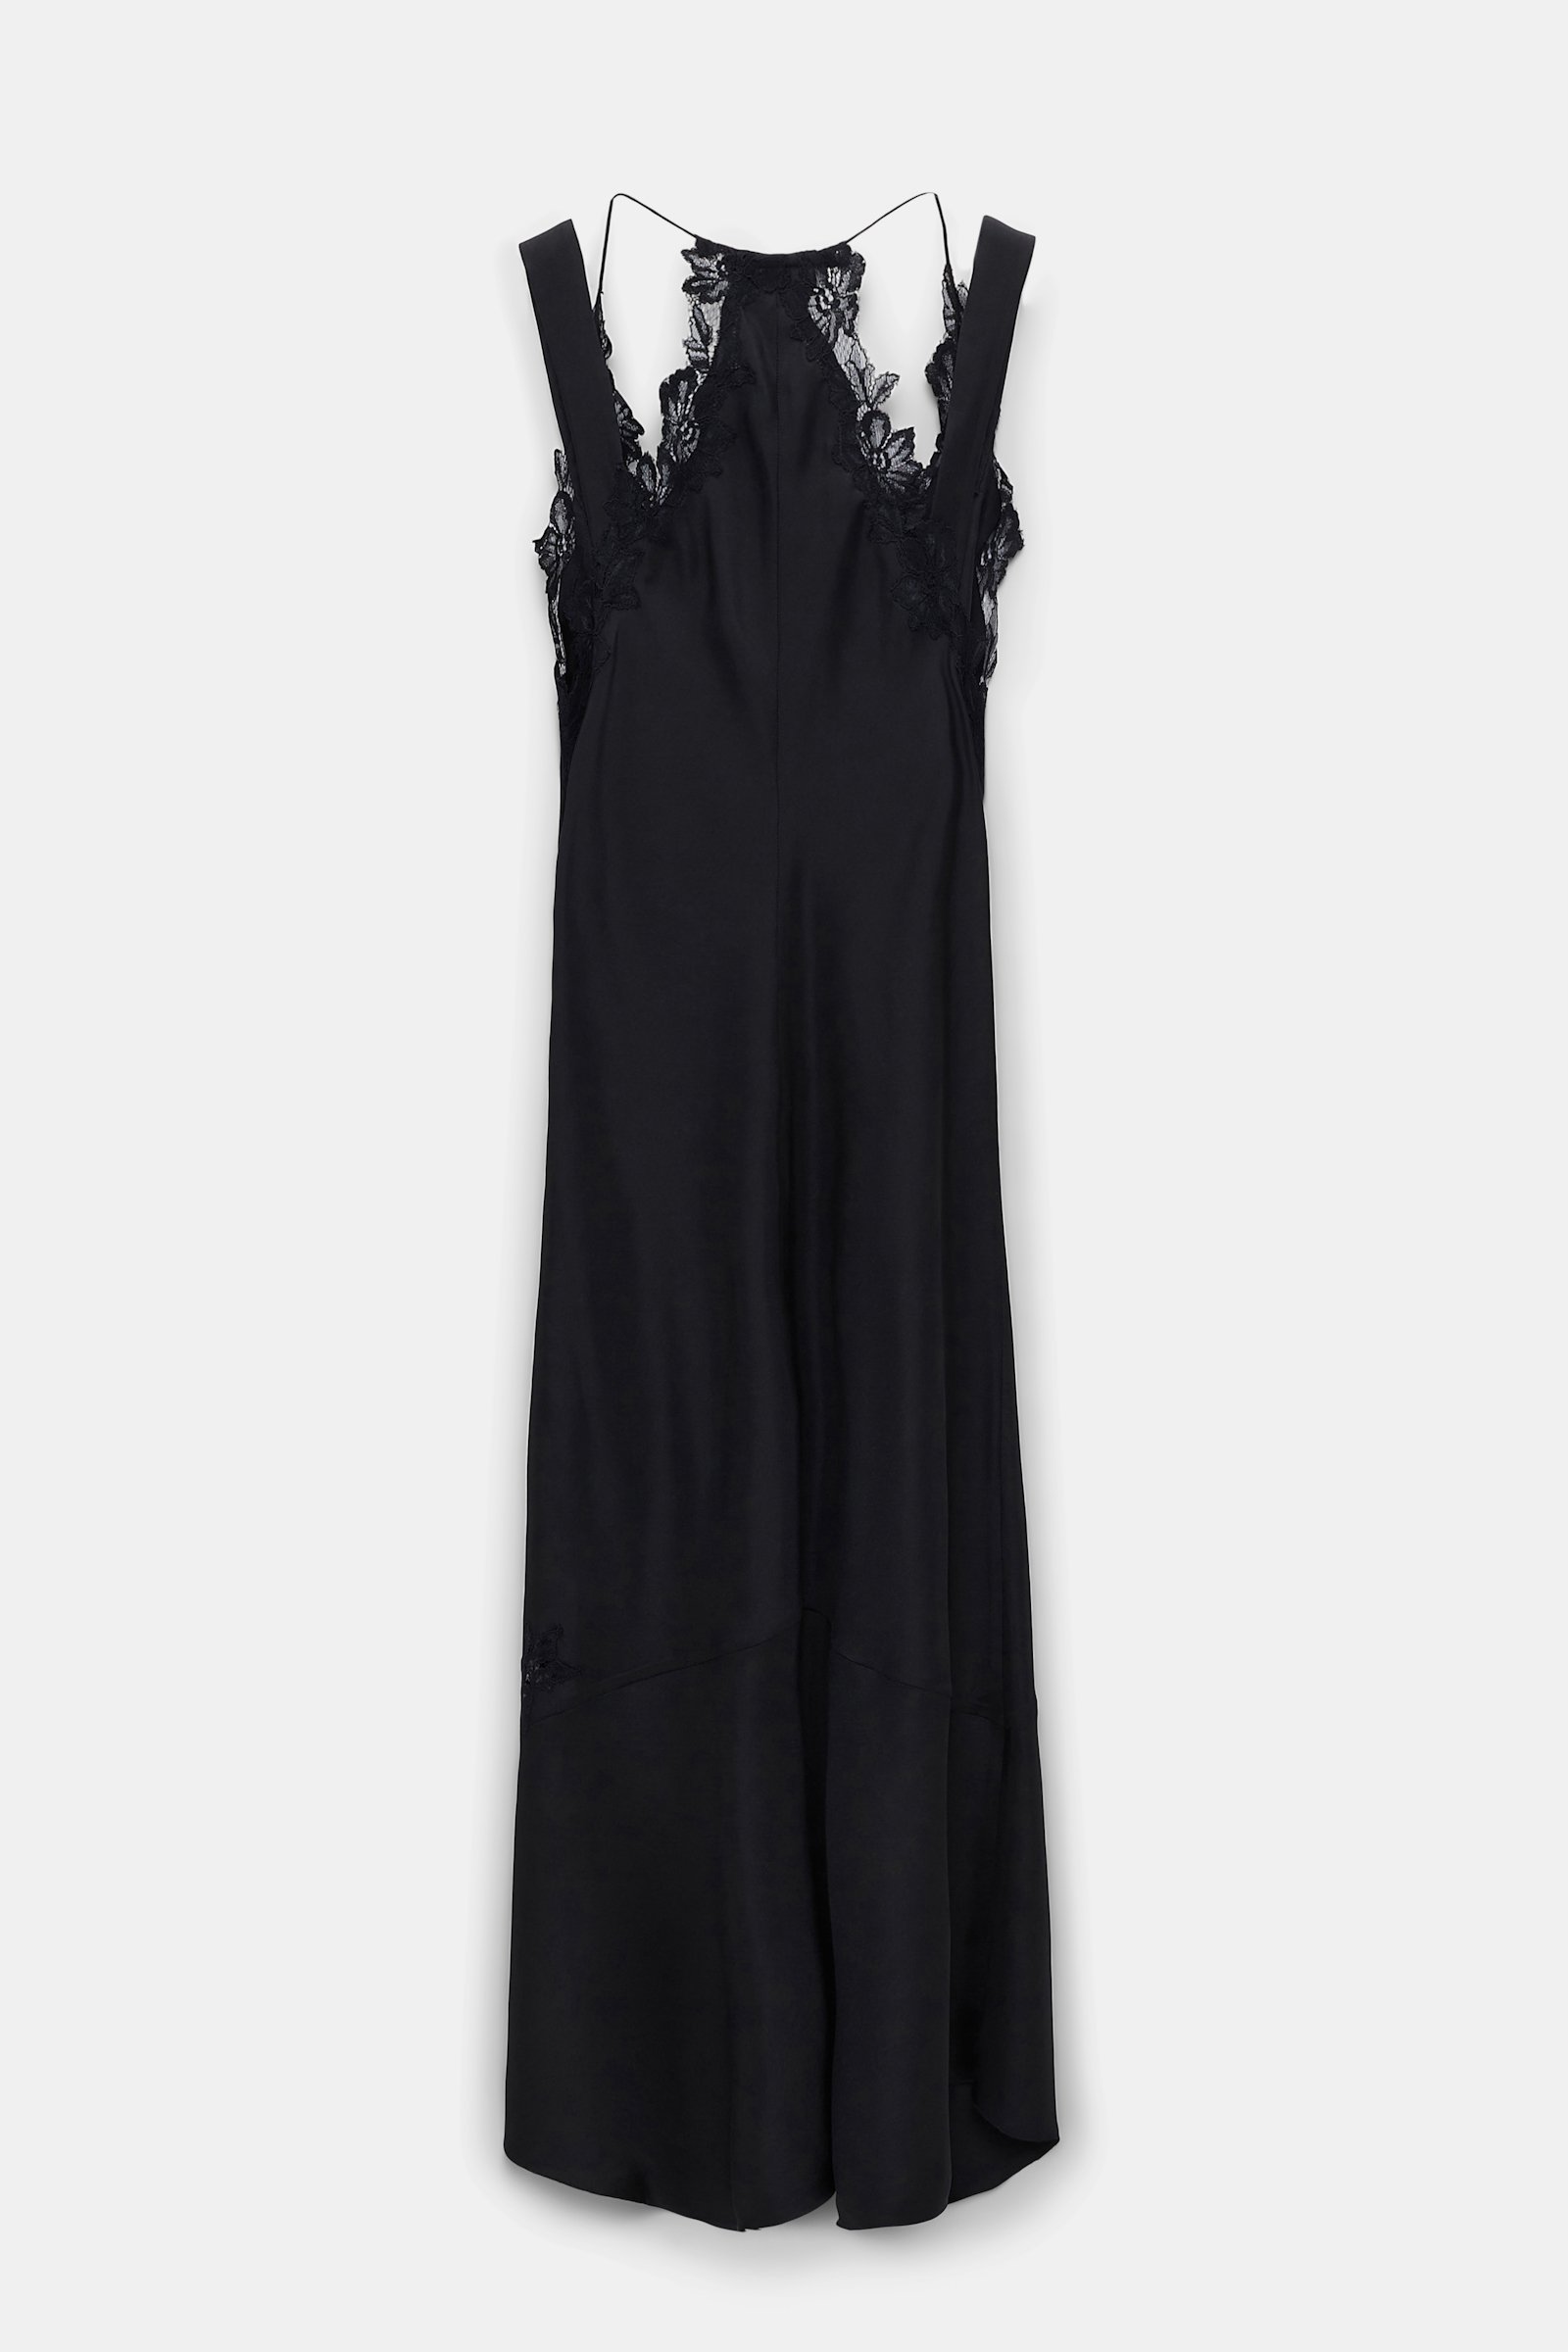 Dorothee Schumacher Silk twill lingerie-style dress with details in lace pure black